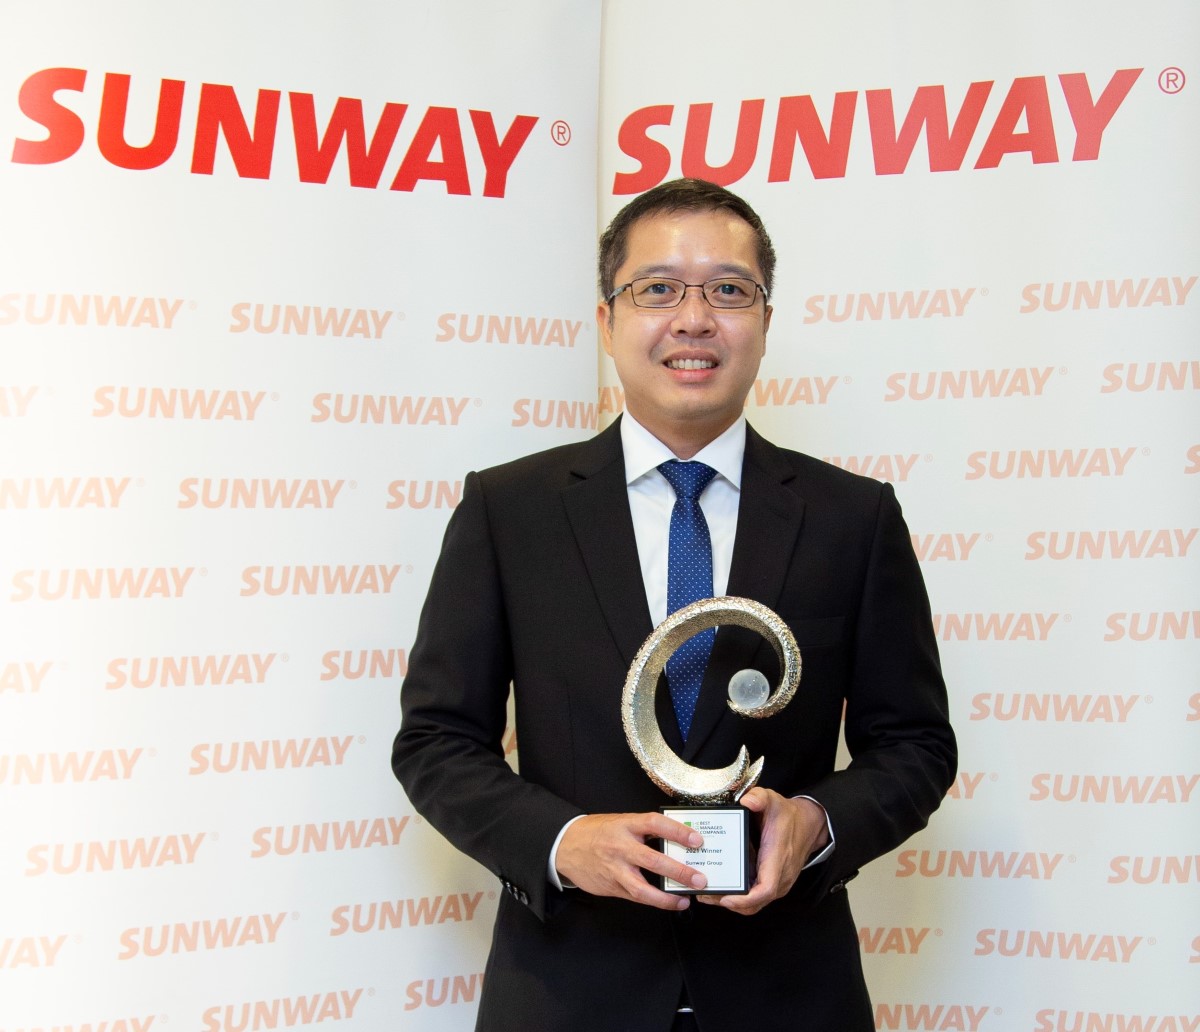 : A medium shot of Evan Cheah who is Executive Vice President of President’s Office at Sunway Berhad, dressed impeccably smart in black suit, white button up and blue tie, holding Malaysia’s Best Managed Companies 2021 trophy conferred by global consulting firm Deloitte, fronting a simple red-and-white Sunway backdrop